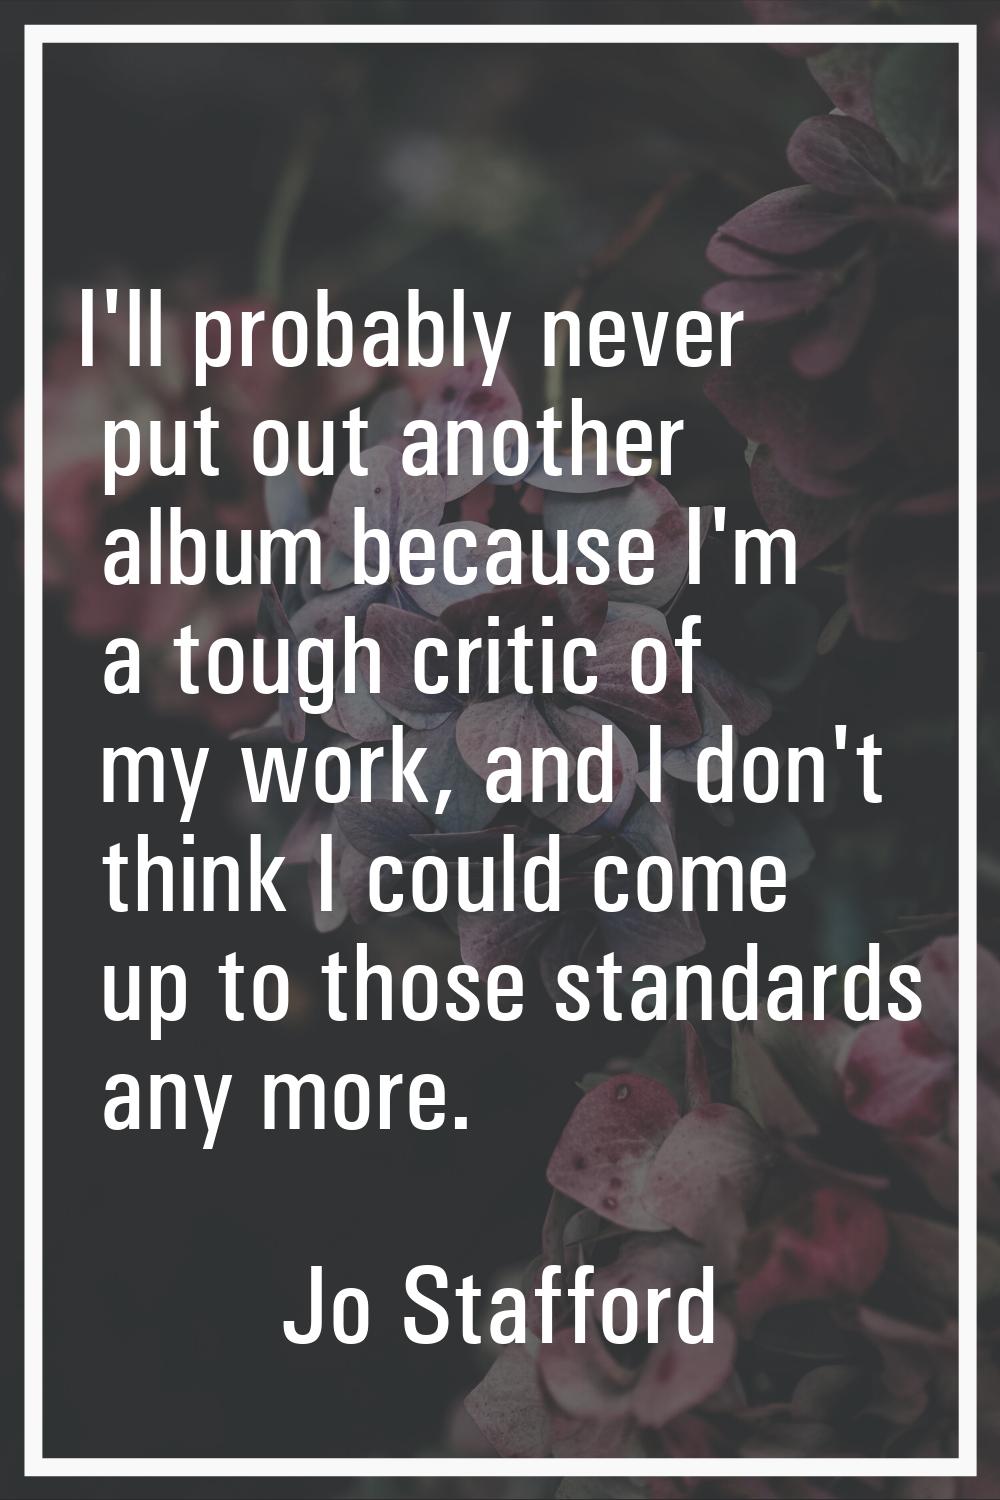 I'll probably never put out another album because I'm a tough critic of my work, and I don't think 